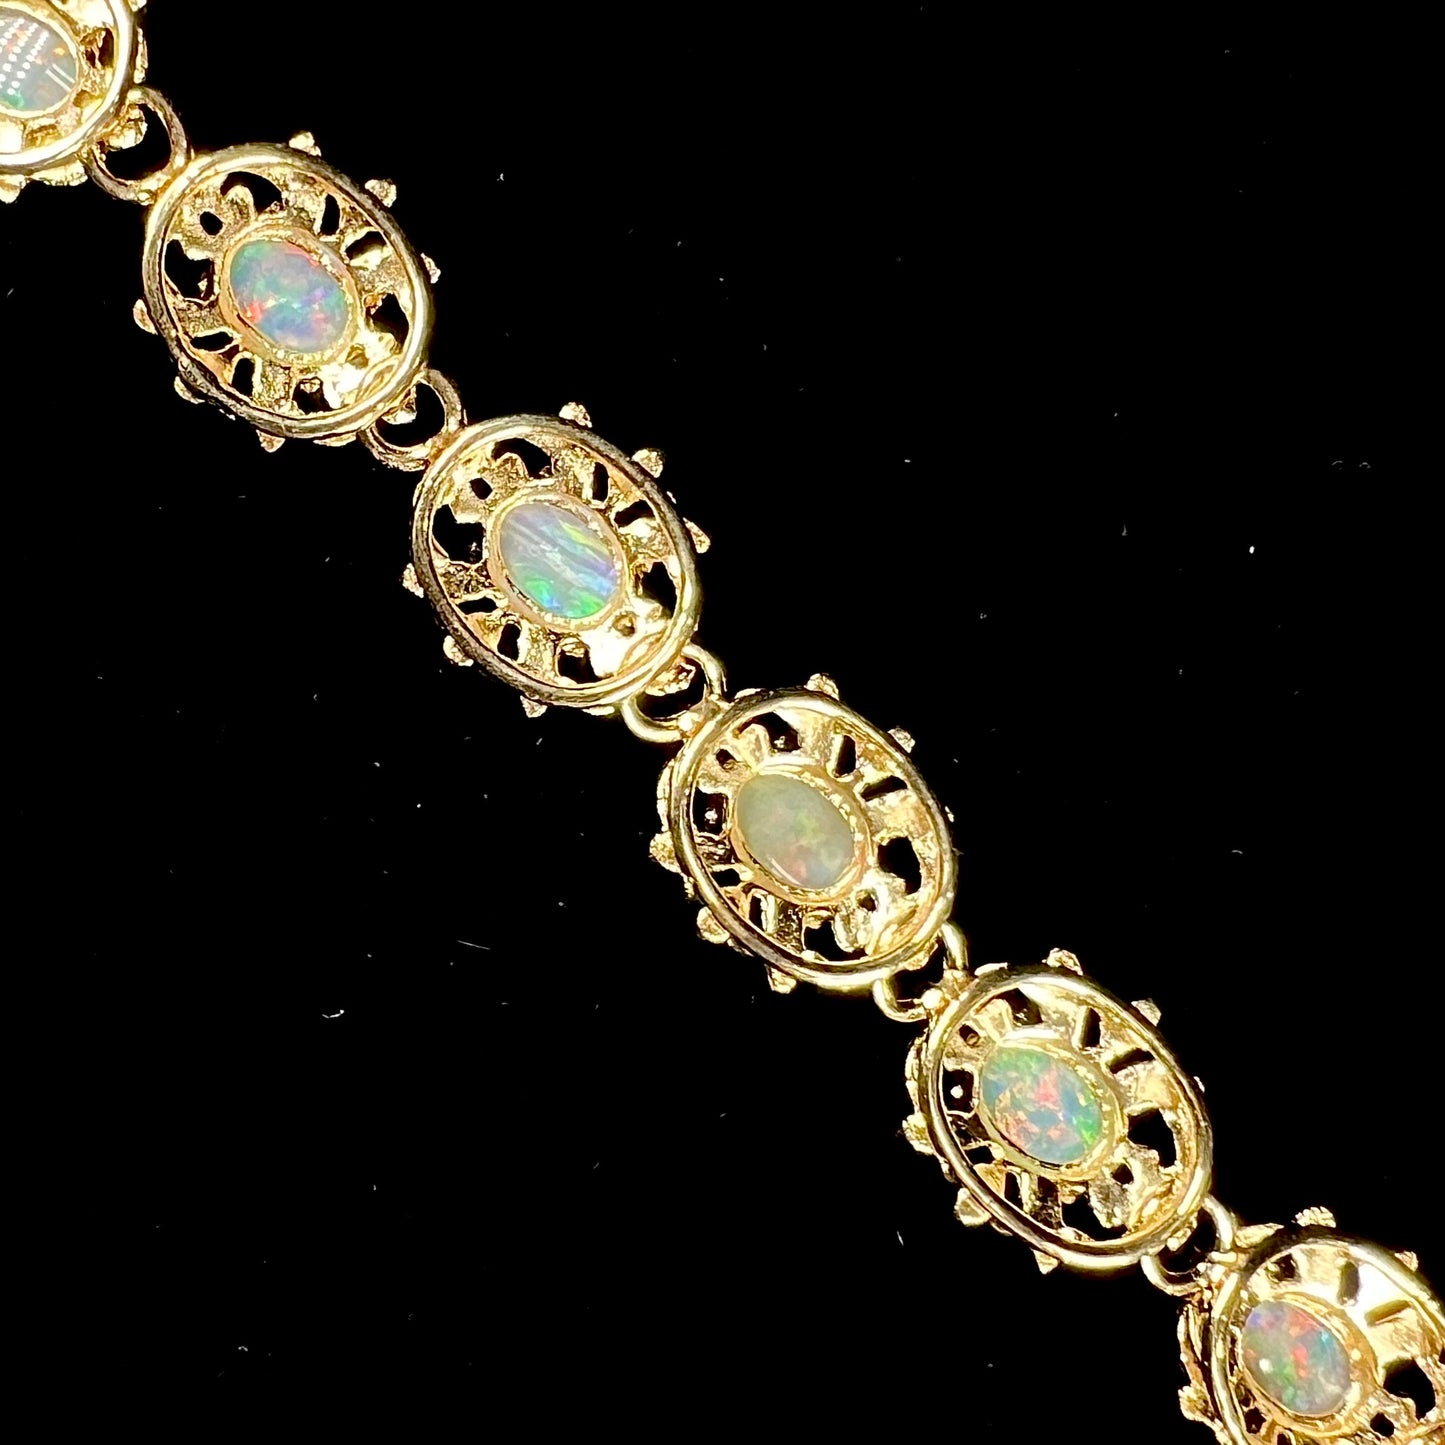 A ladies' yellow gold bracelet set with natural, oval cabochon cut white crystal opals.